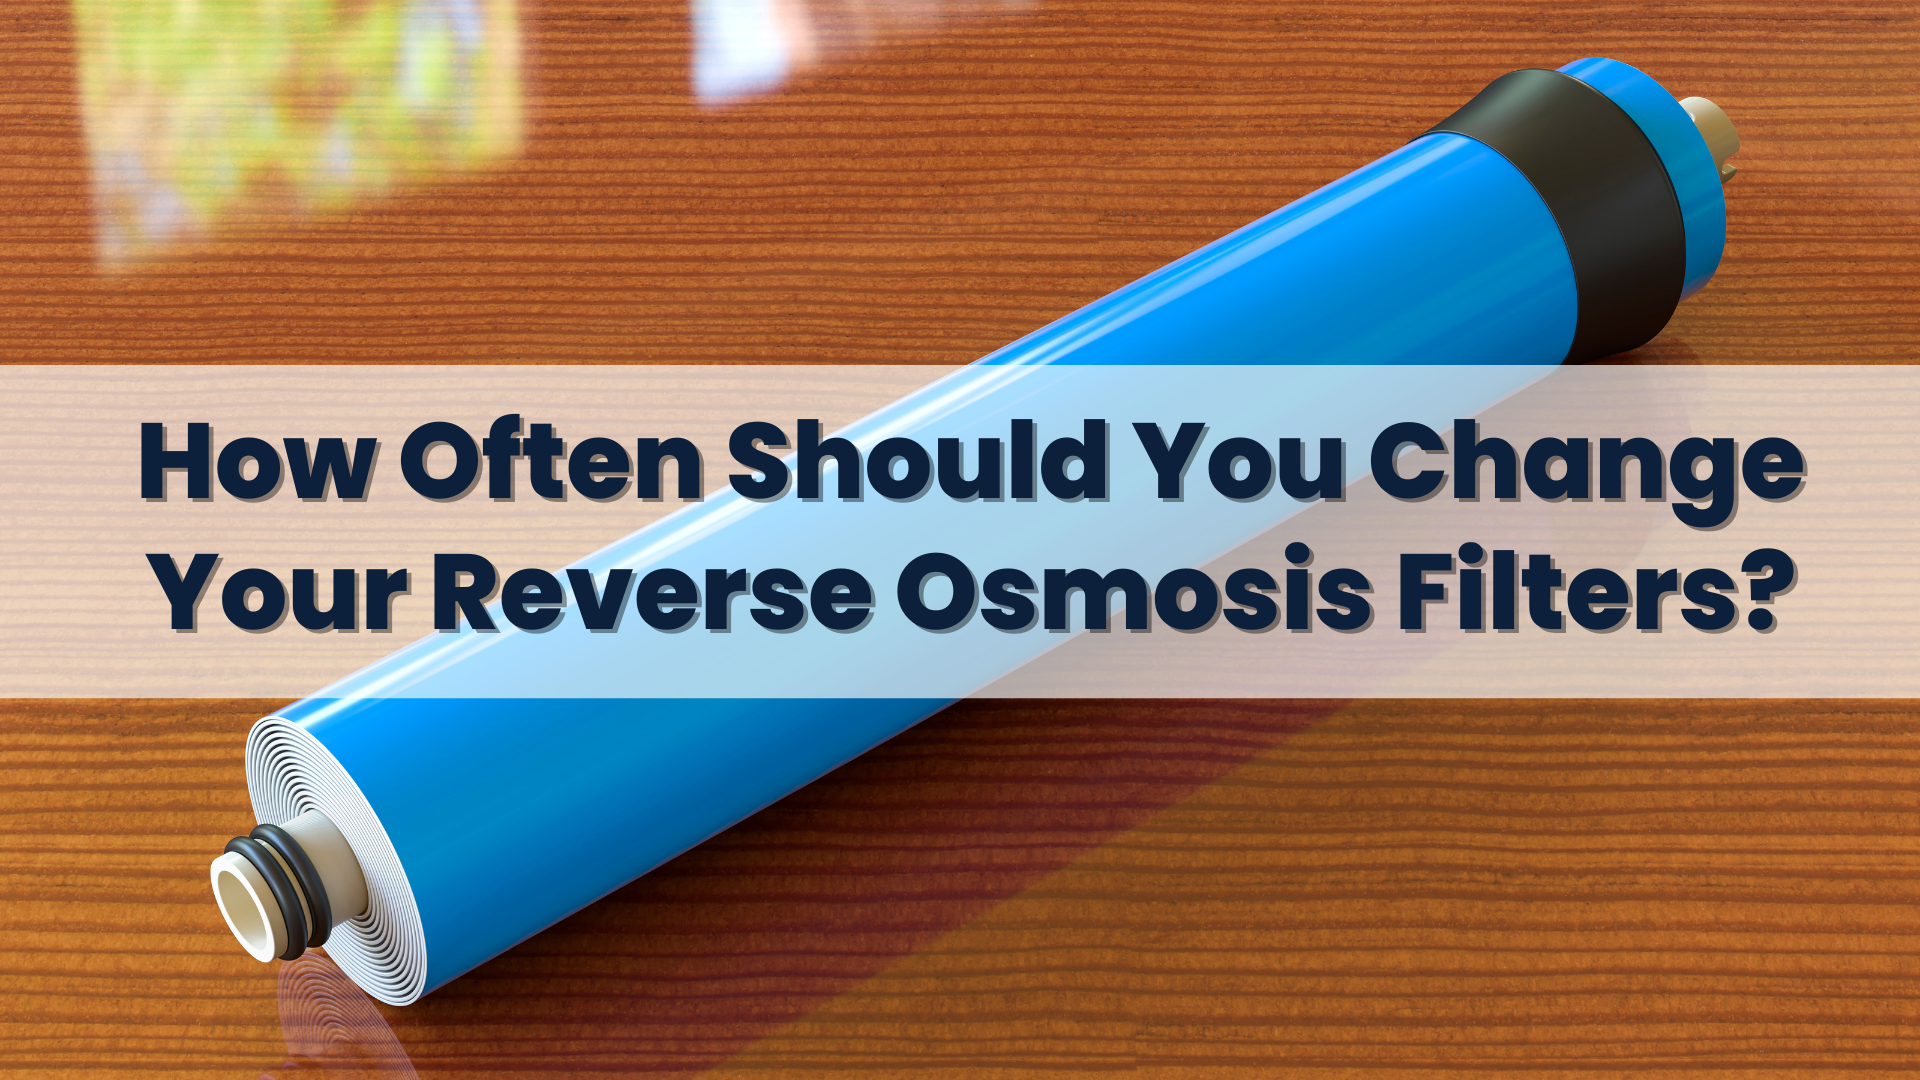 How Often Should You Change Your Reverse Osmosis Filters